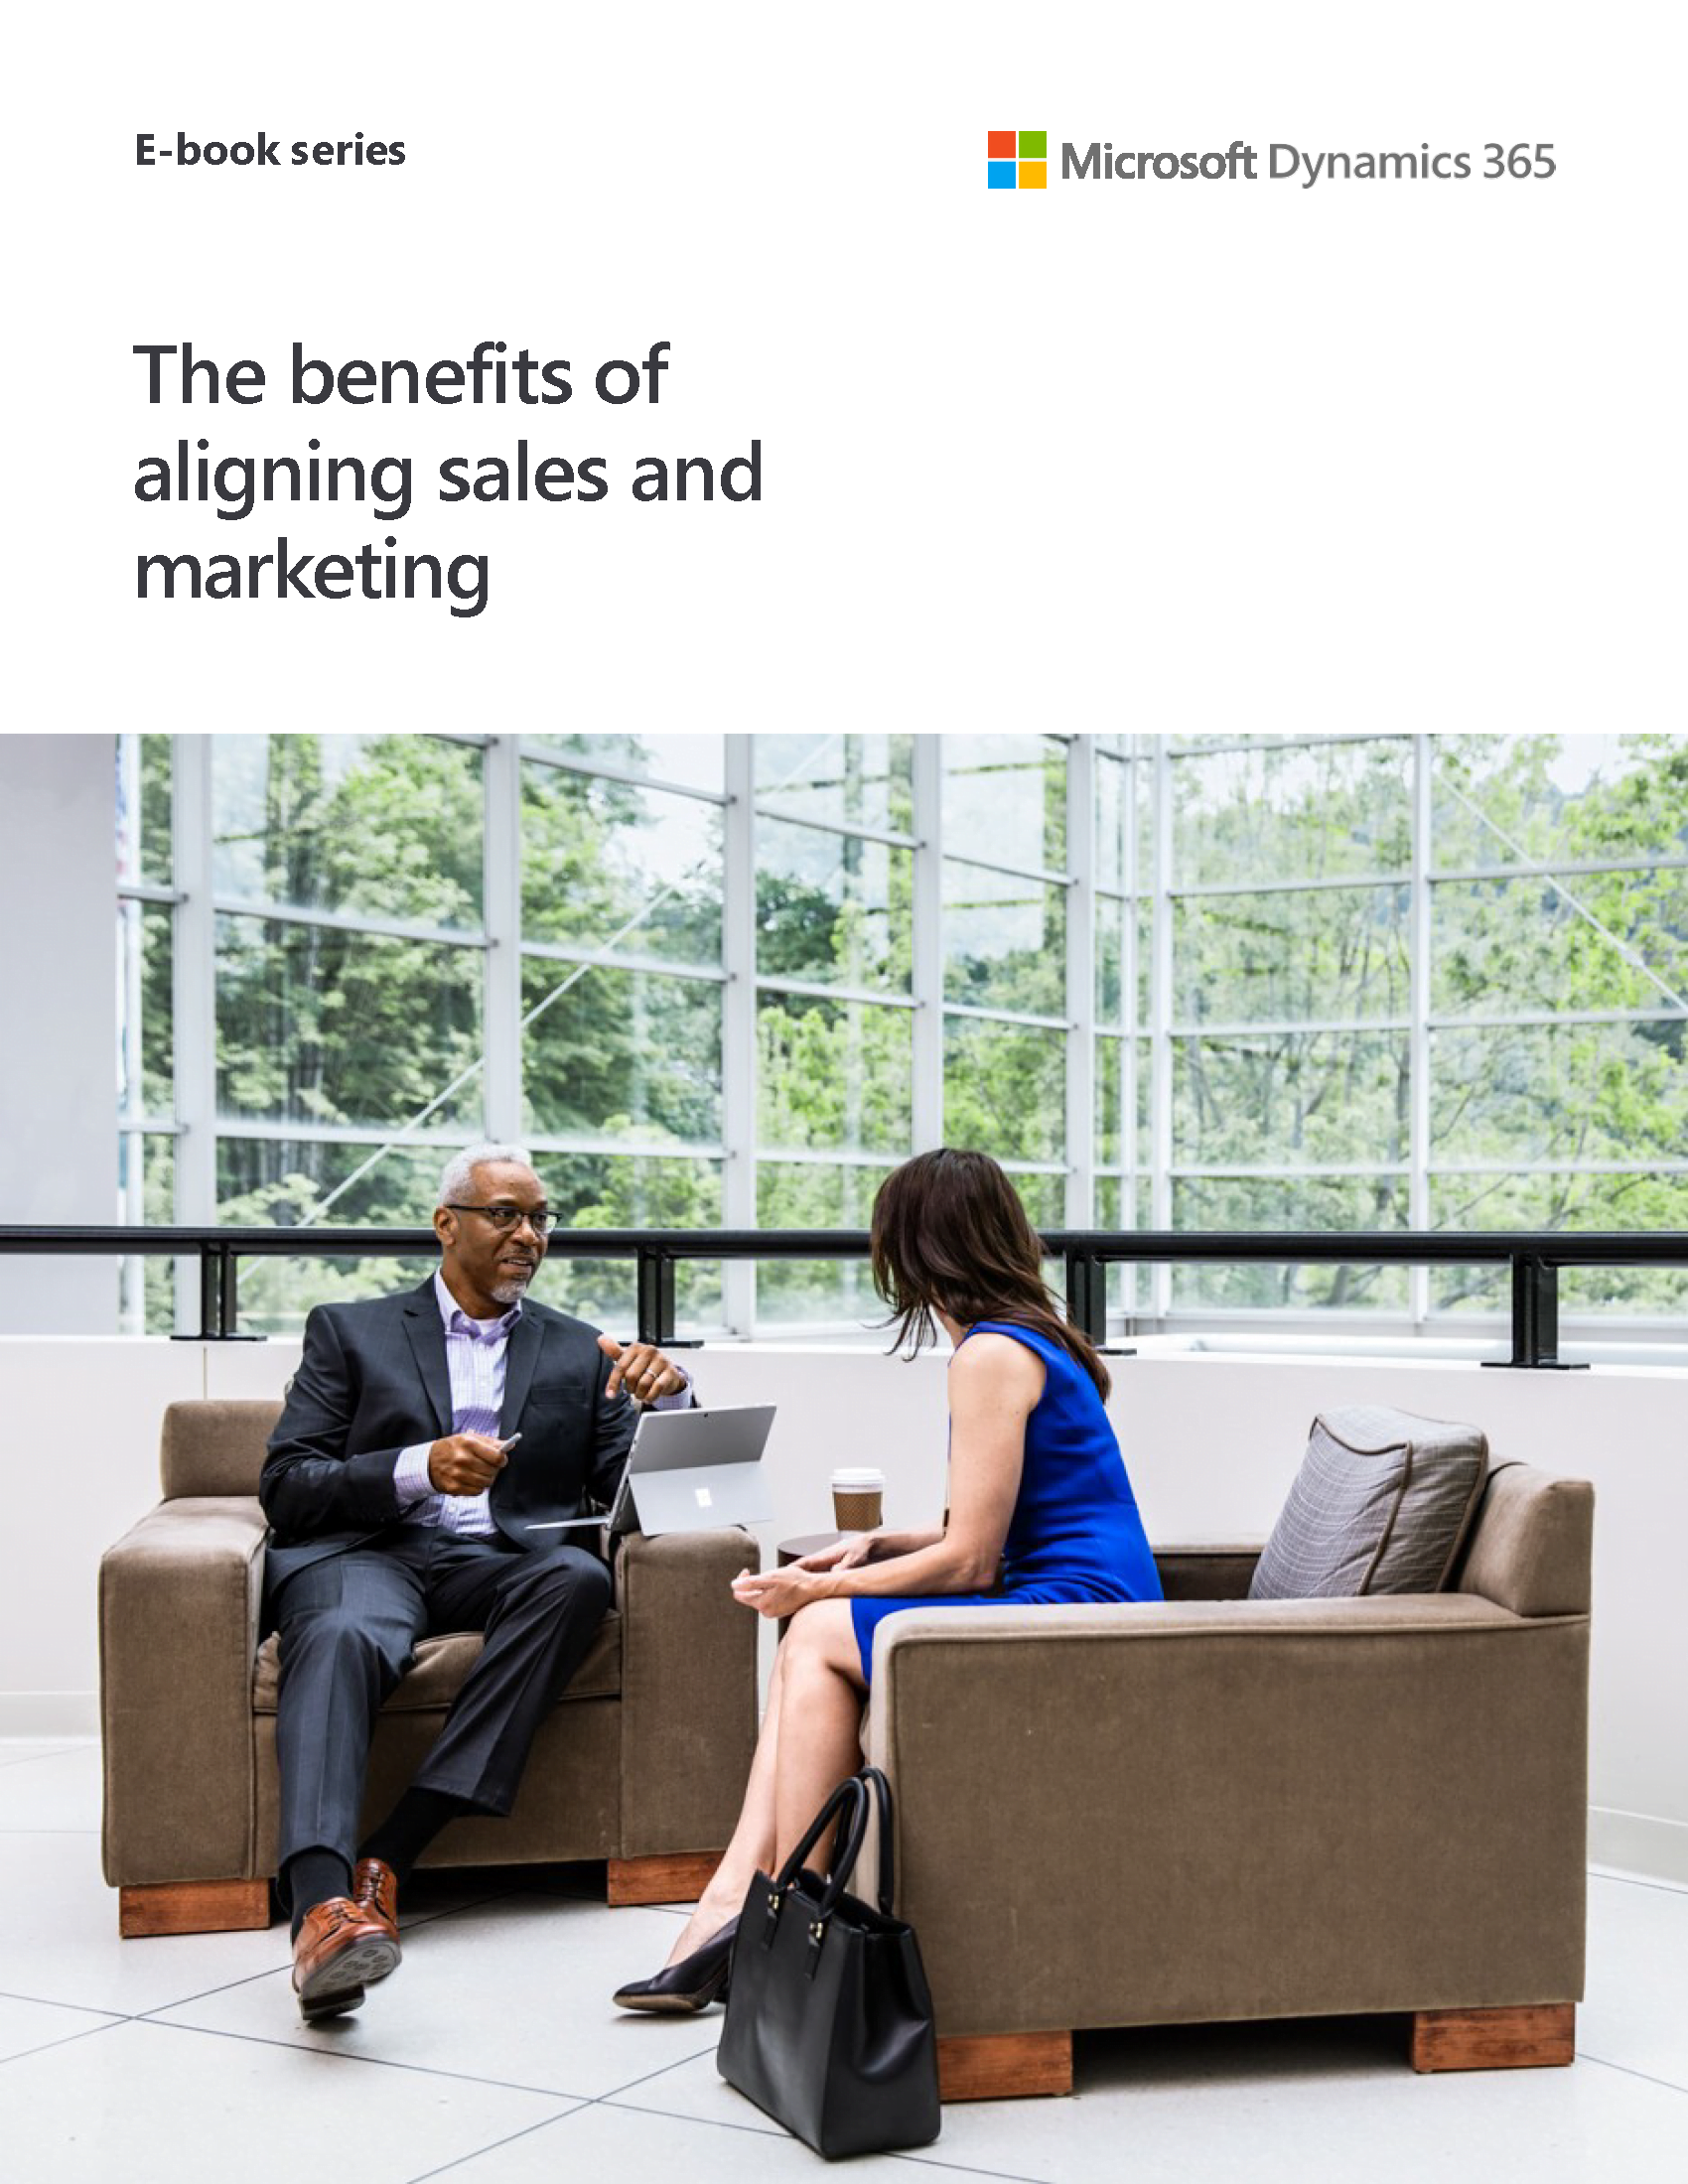 MS ebook The benefits of aligning sales and marketing QGate branded THUMBNAIL